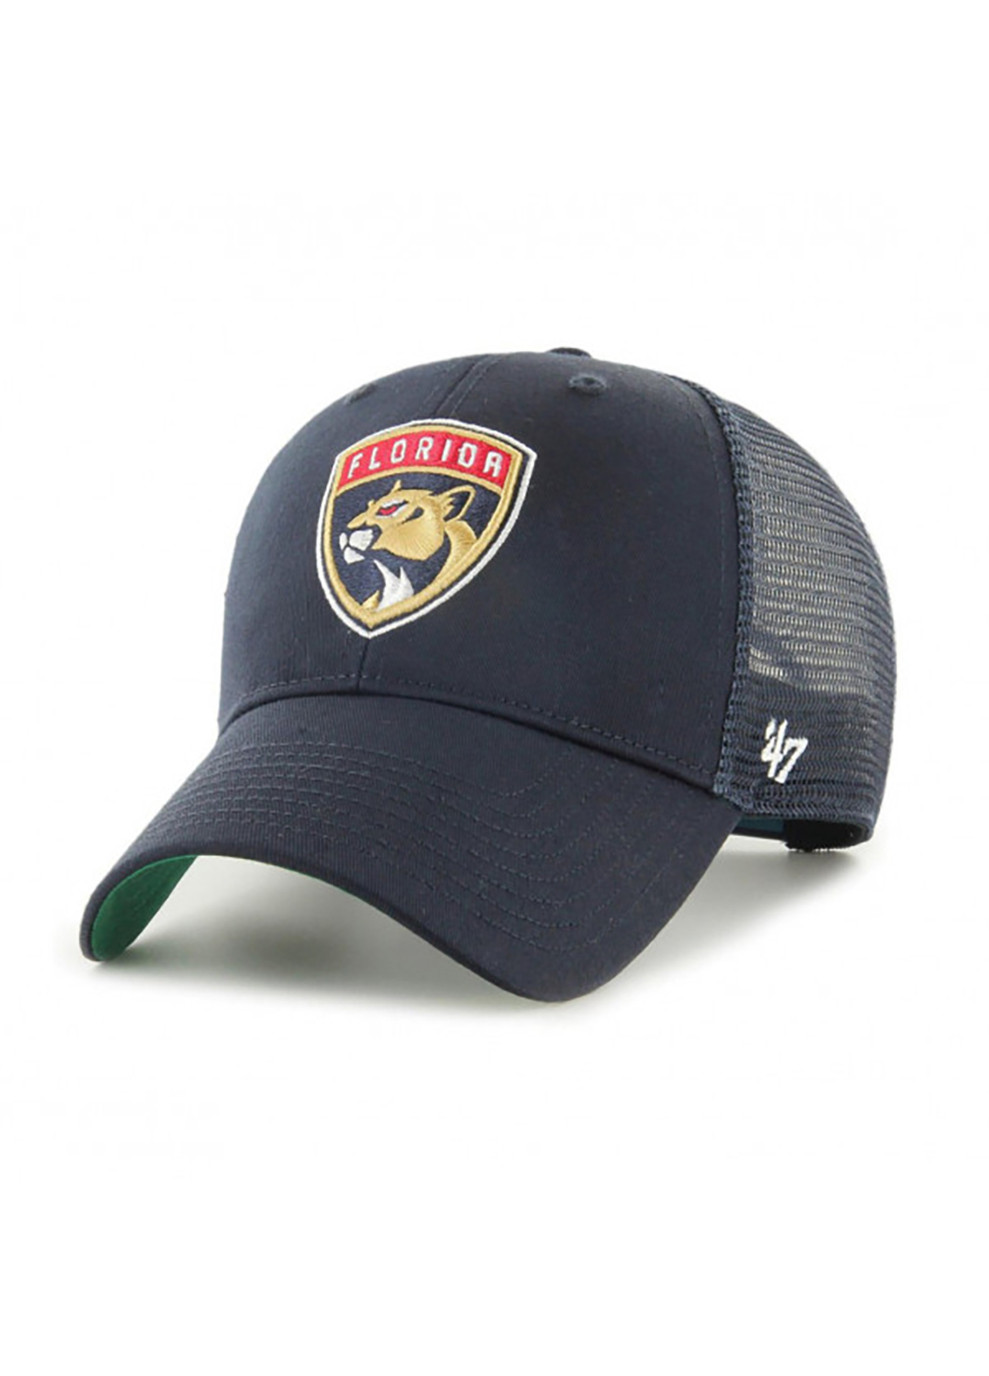 Кепка-тракер FLORIDA PANTHERS One Size Blue/green 47 Brand (258131707)